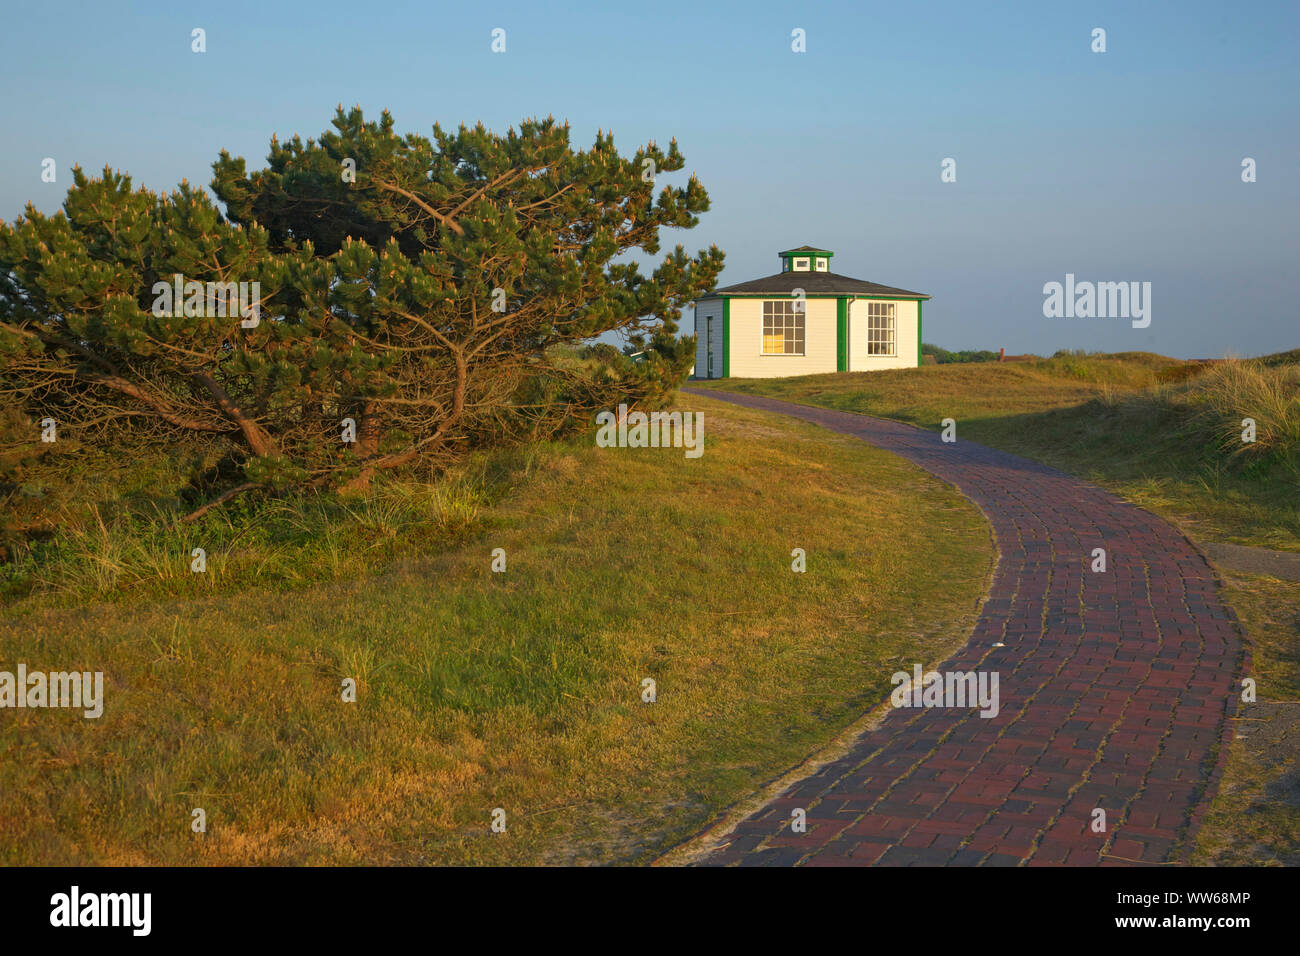 Reading pavilion in the village of the island Spiekeroog Stock Photo